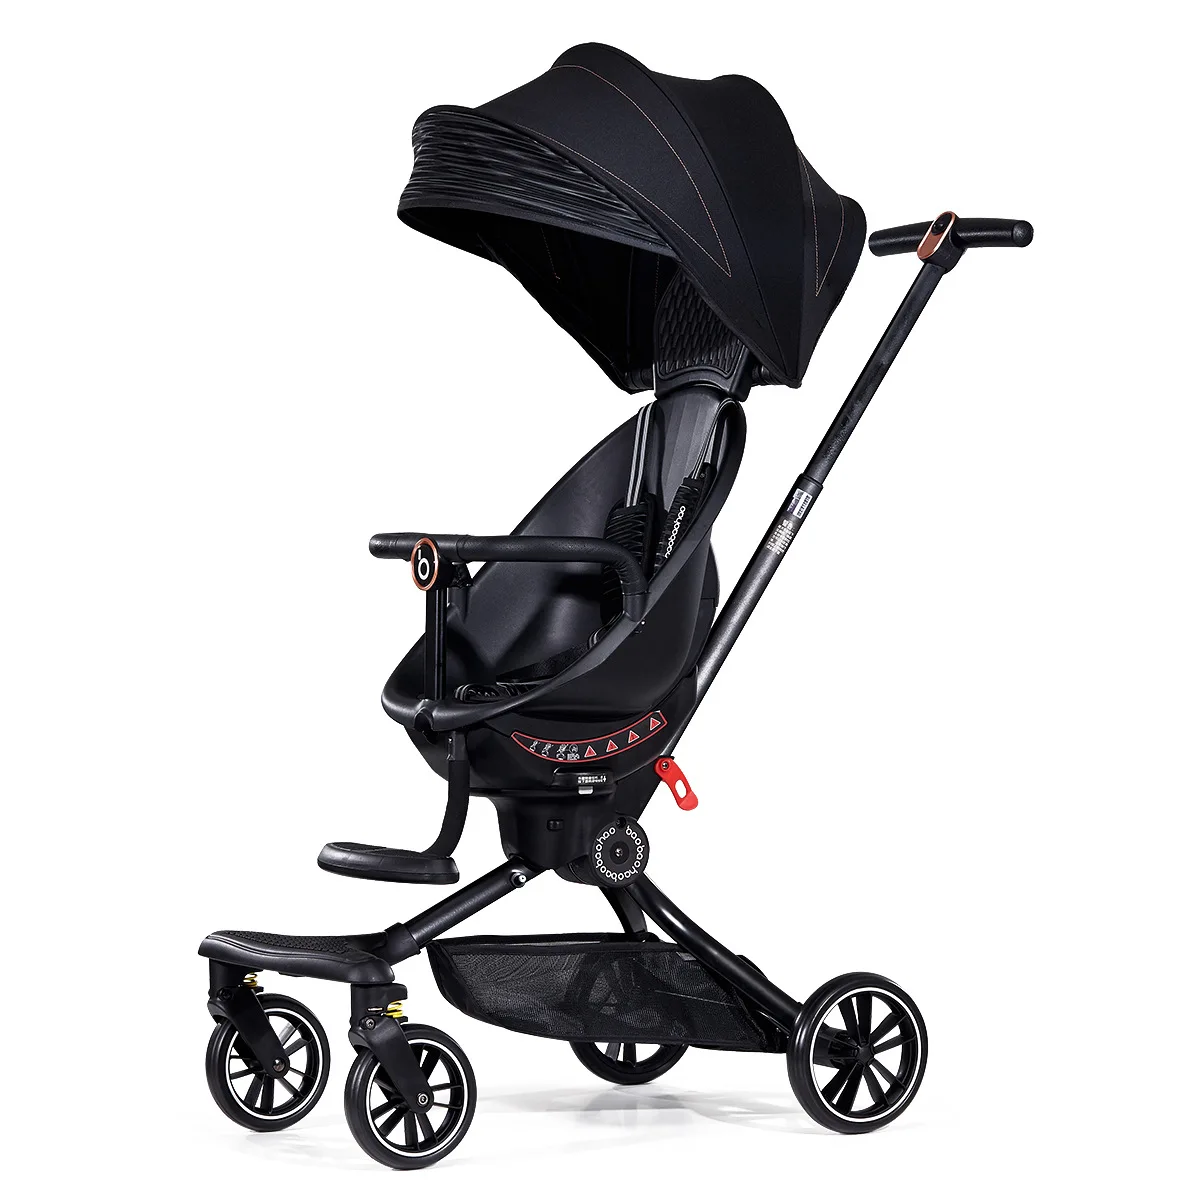 

Baby Good V8 Baby Walker Artifact Walking Baby Stroller Can Sit and Lie Down Light Folding High-view Stroller Stroller